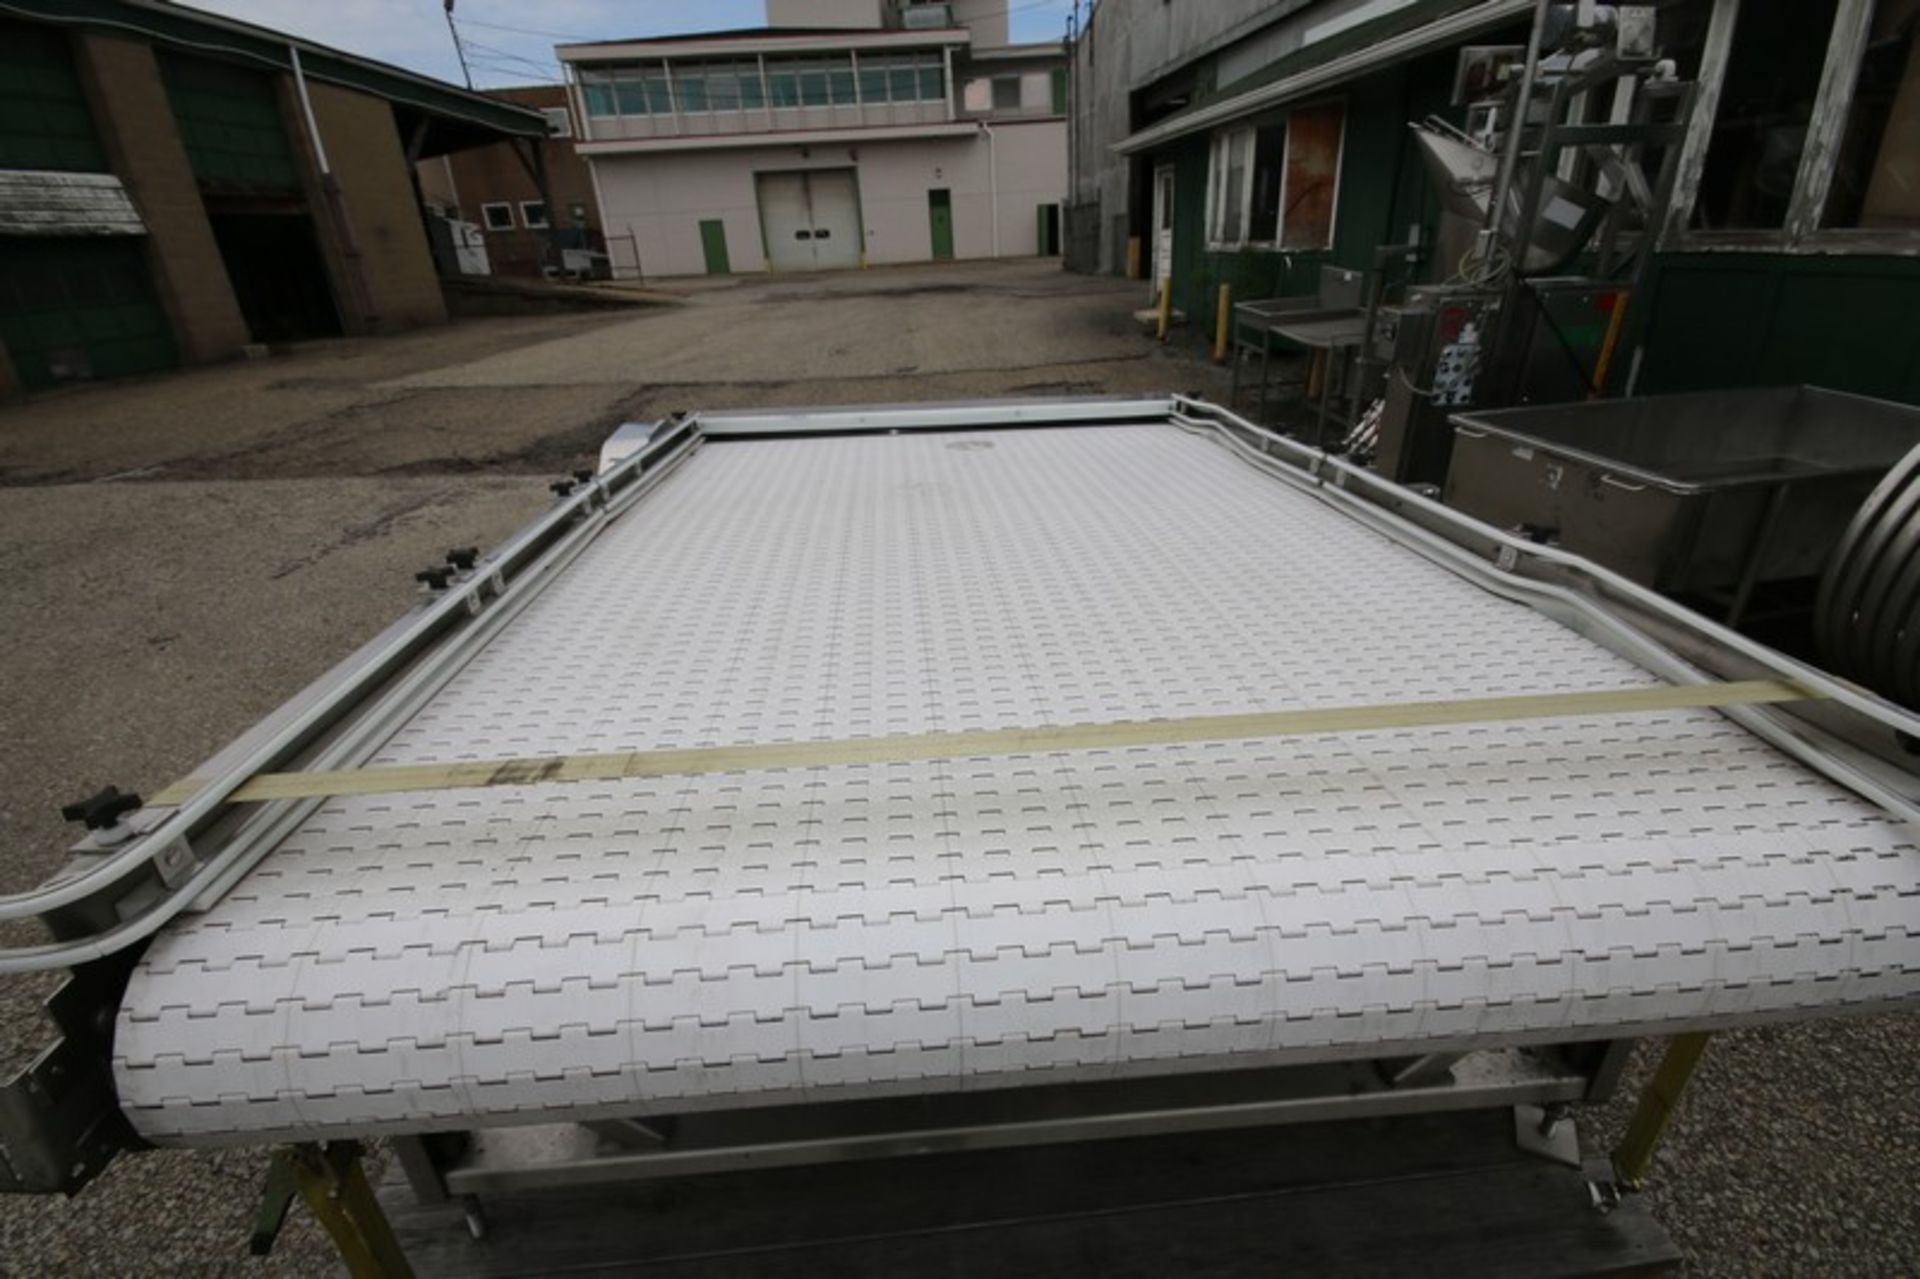 Nercon Aprox. 10' L x 6' W x 40" H S/S Conveyor Accumulation Table, with Rex Type Plastic Belt, with - Image 5 of 7